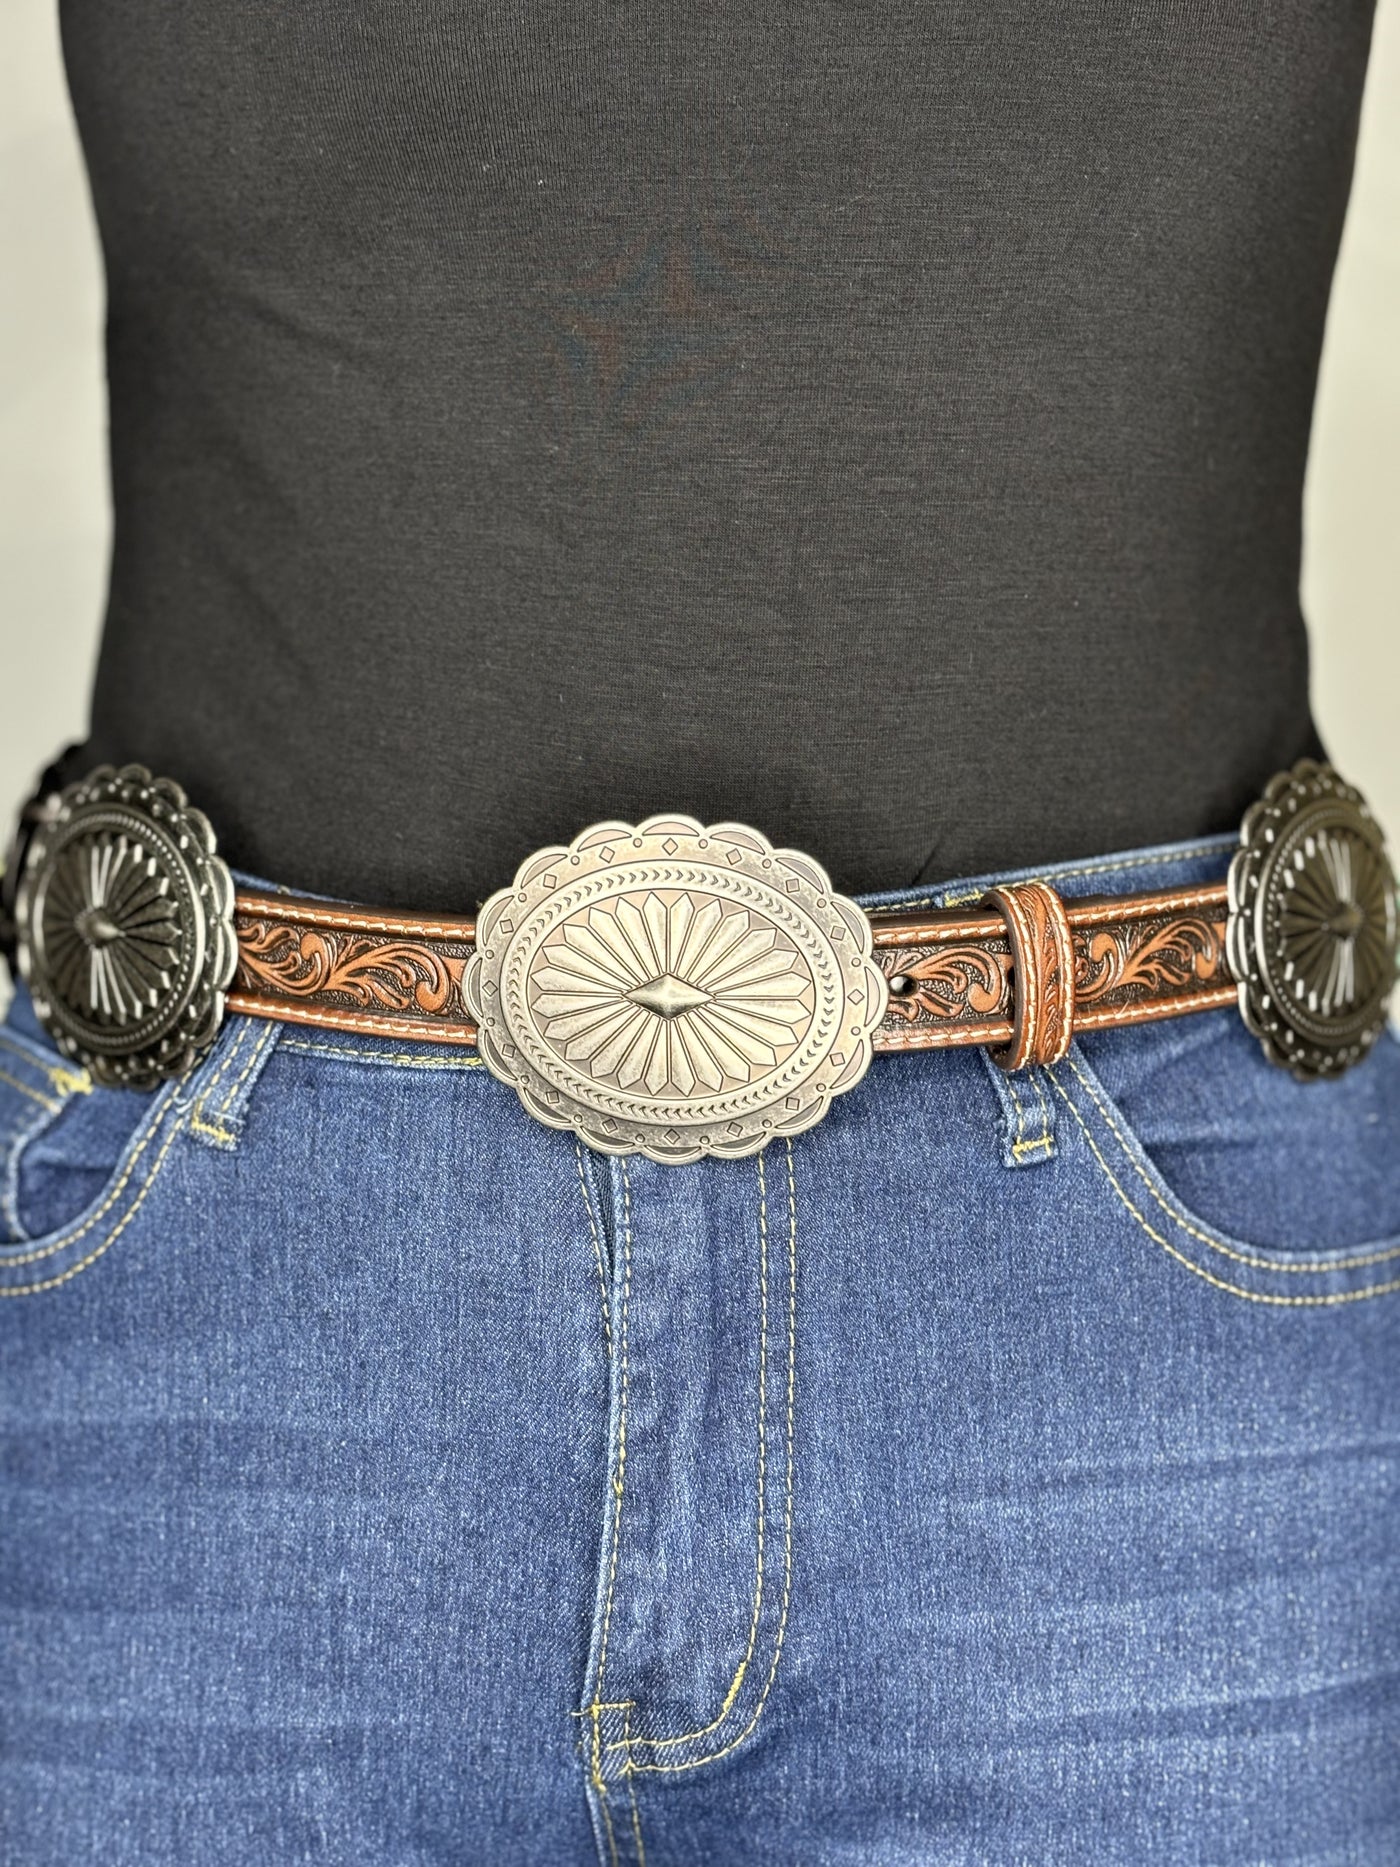 Floral Oval Concho Belt by Ariat